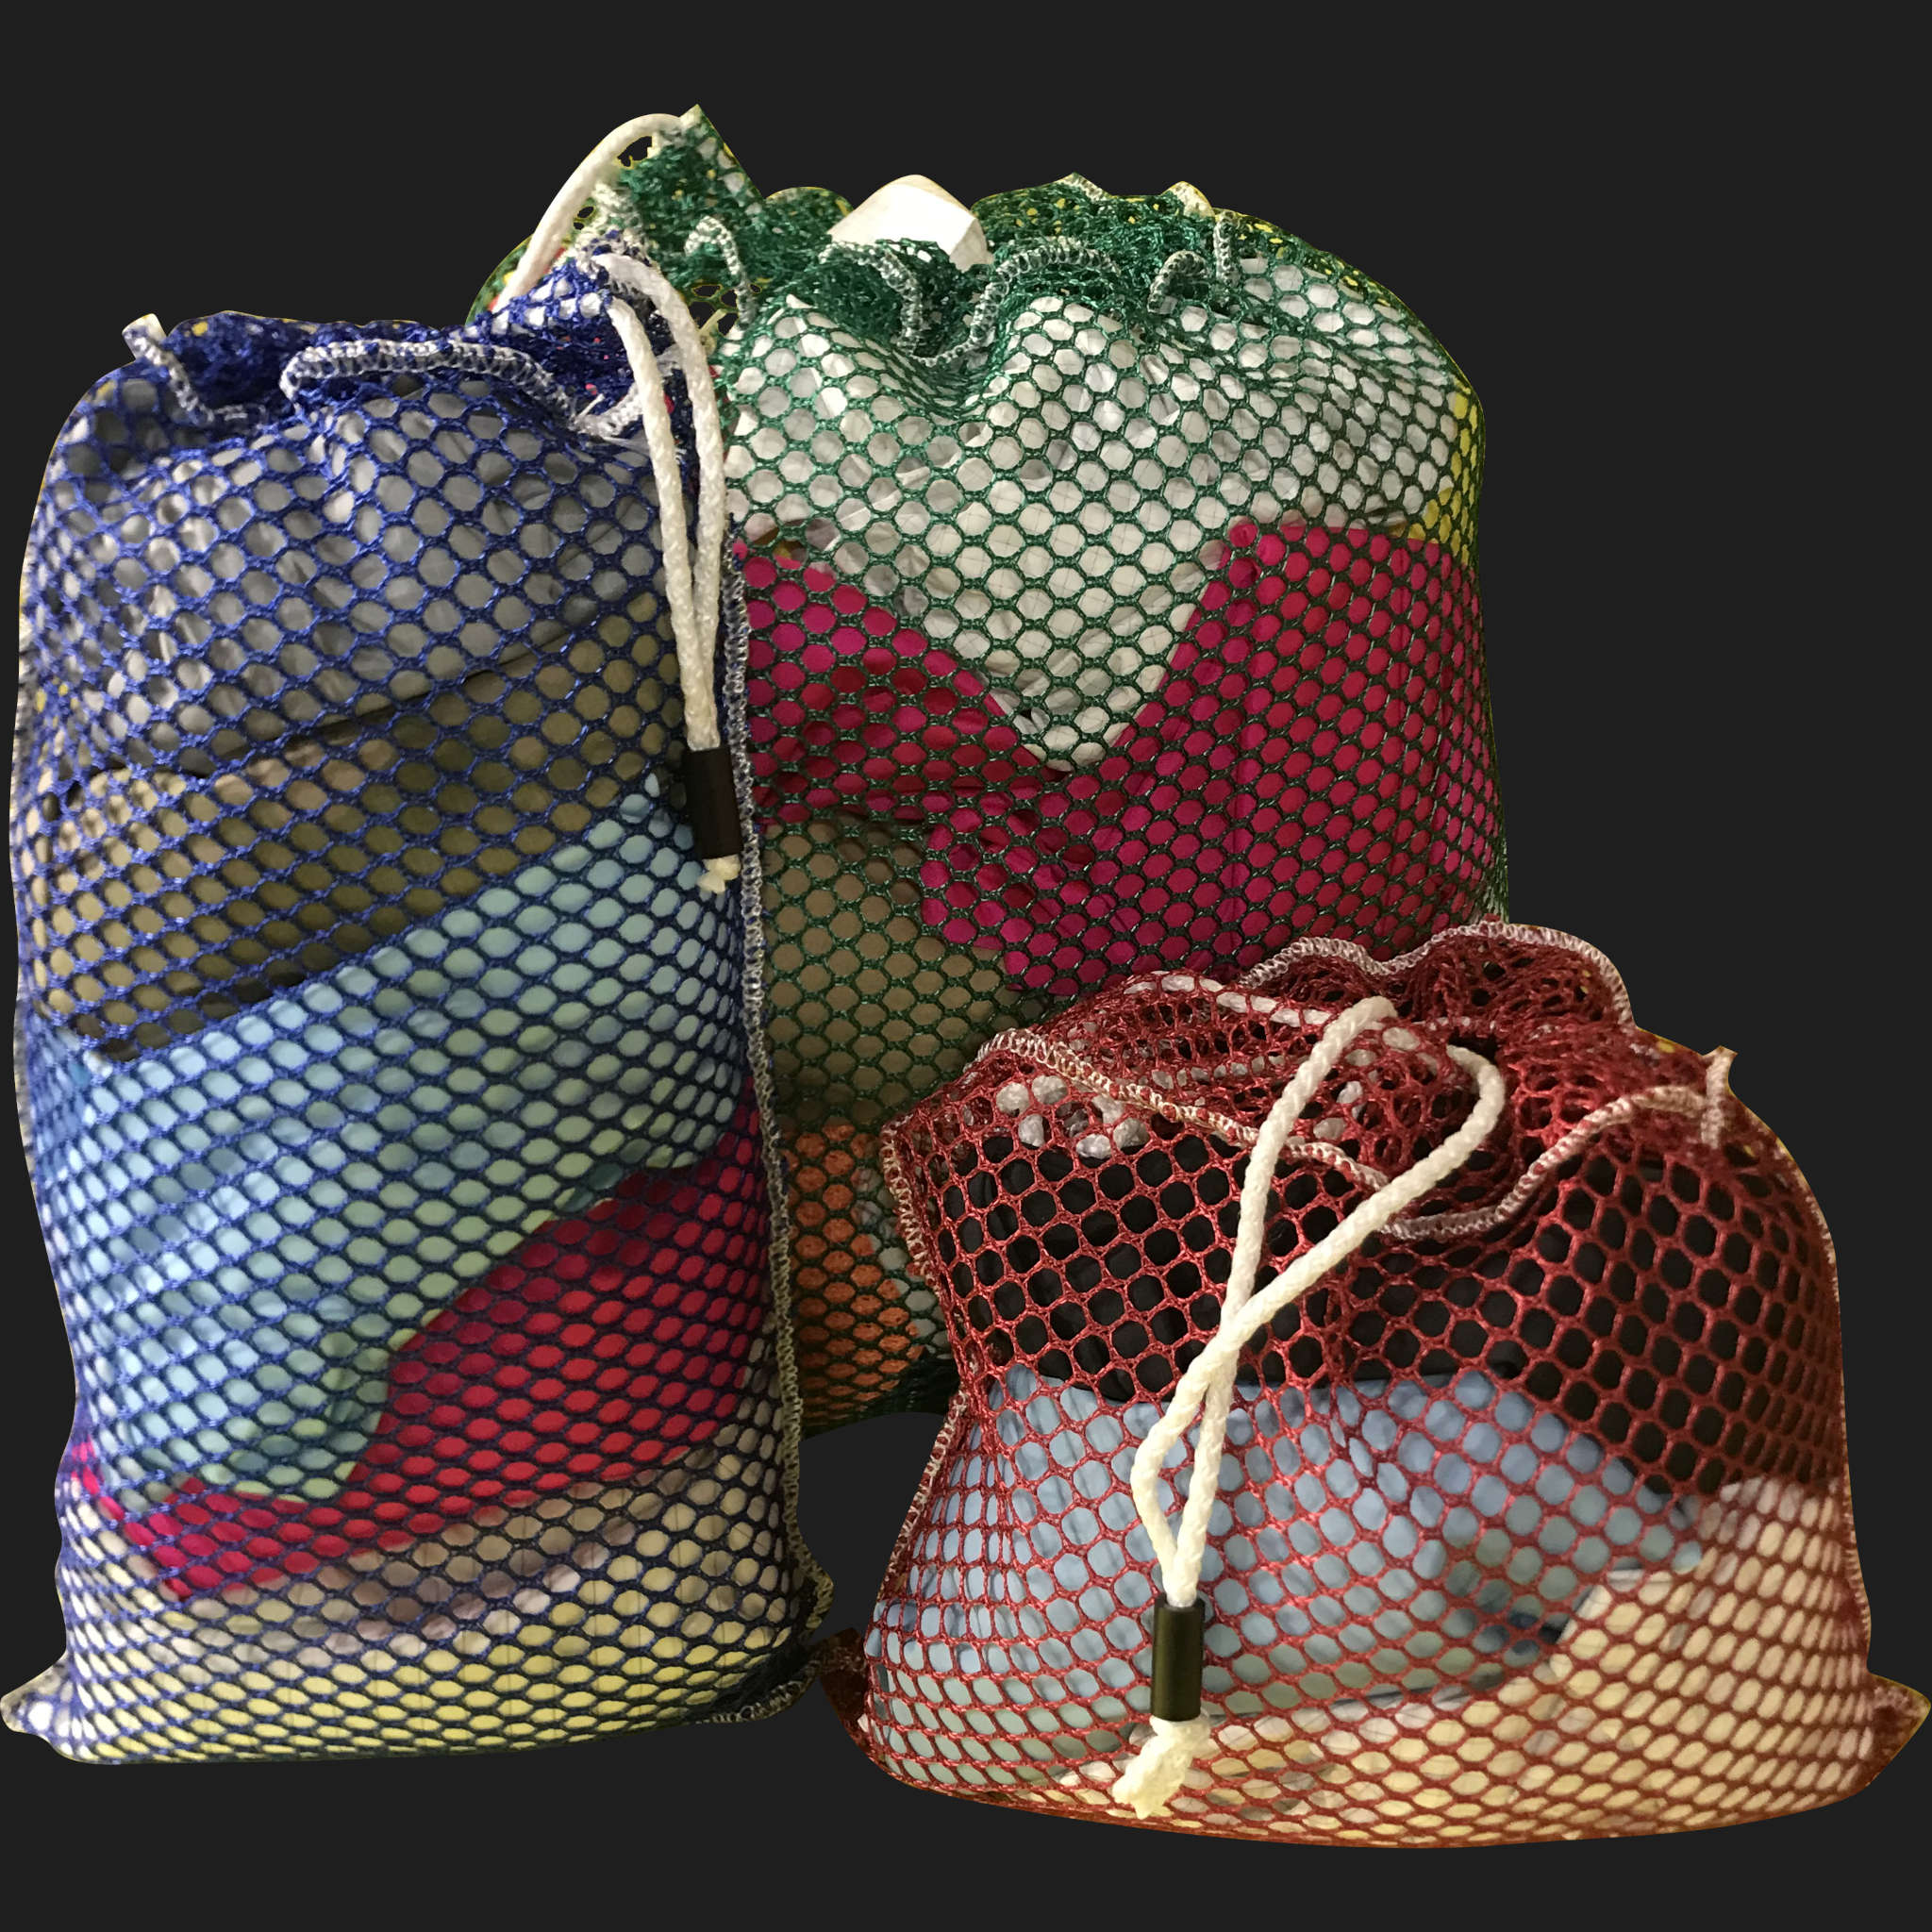 34" x 62" Customized Mesh-Net-Laundry Bags Heavy Duty with Cord and barrellock closure